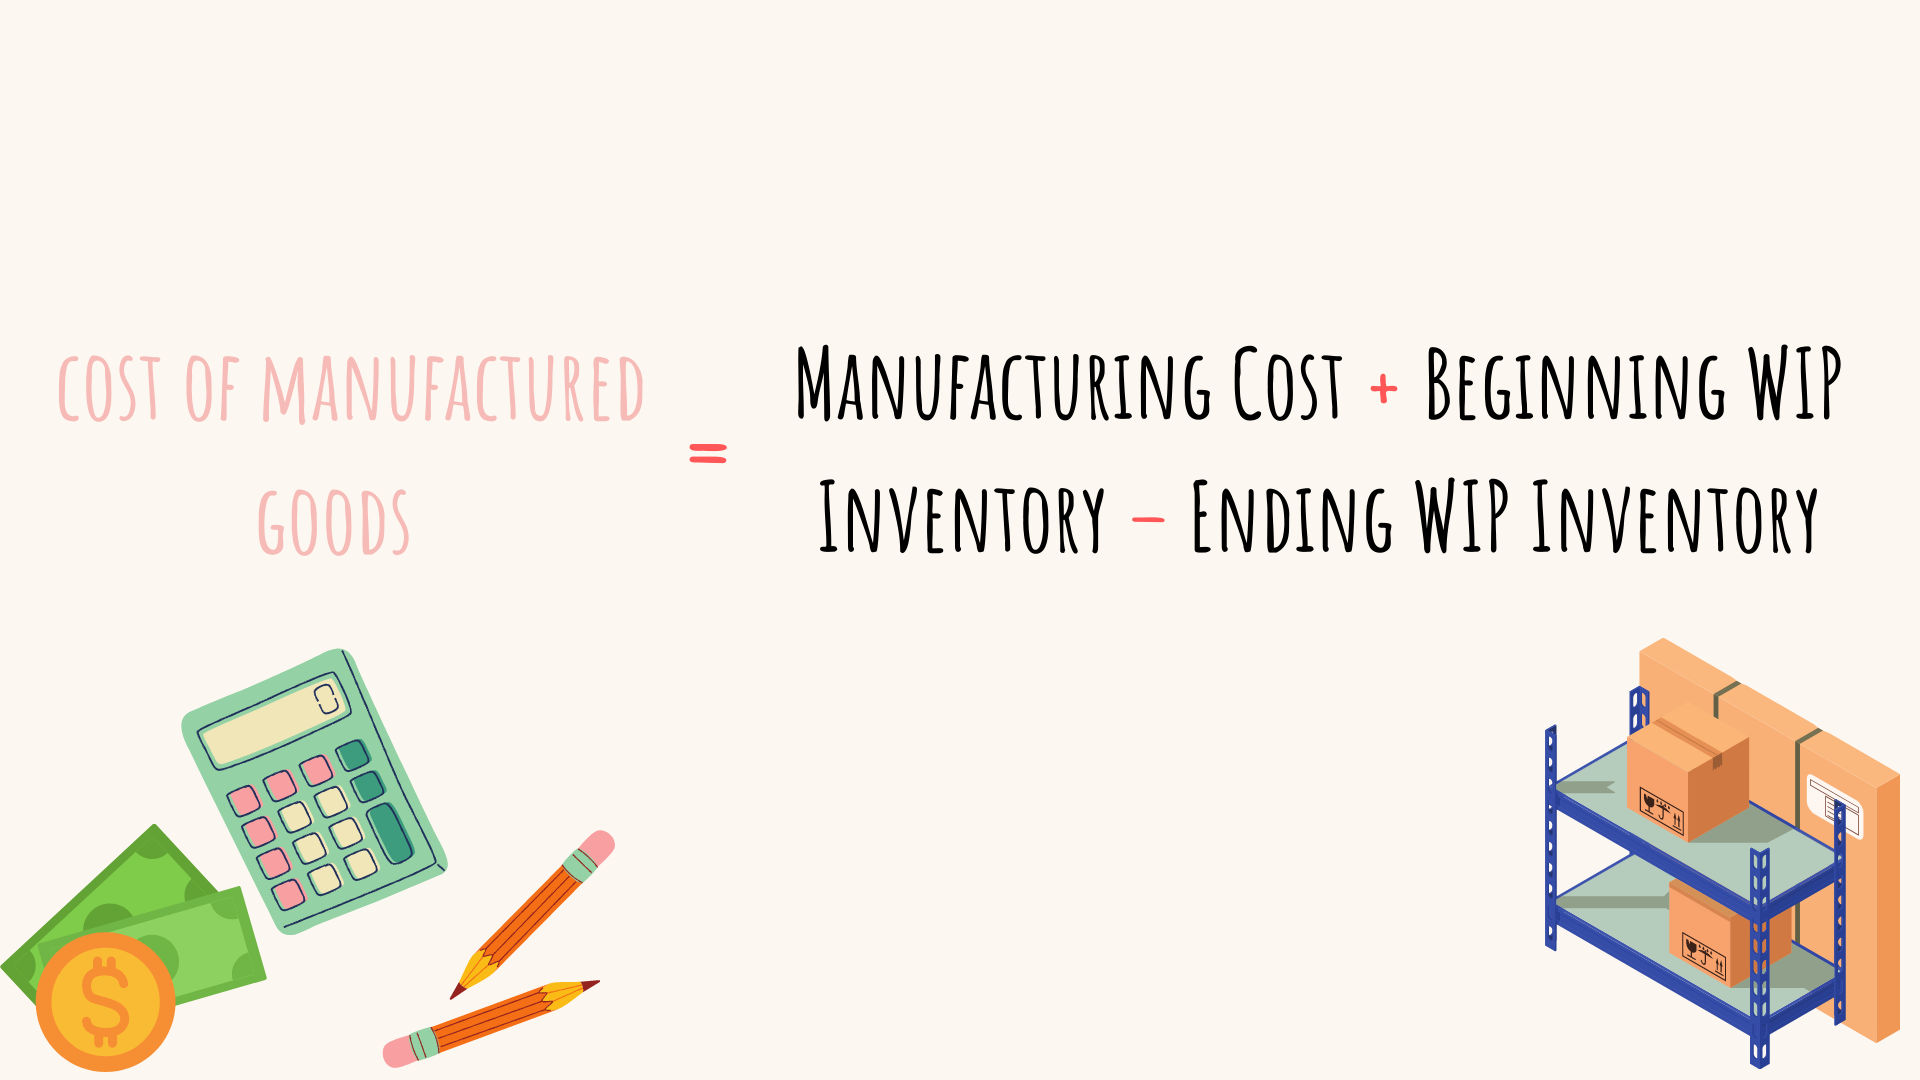 Cost of manufactured goods formula